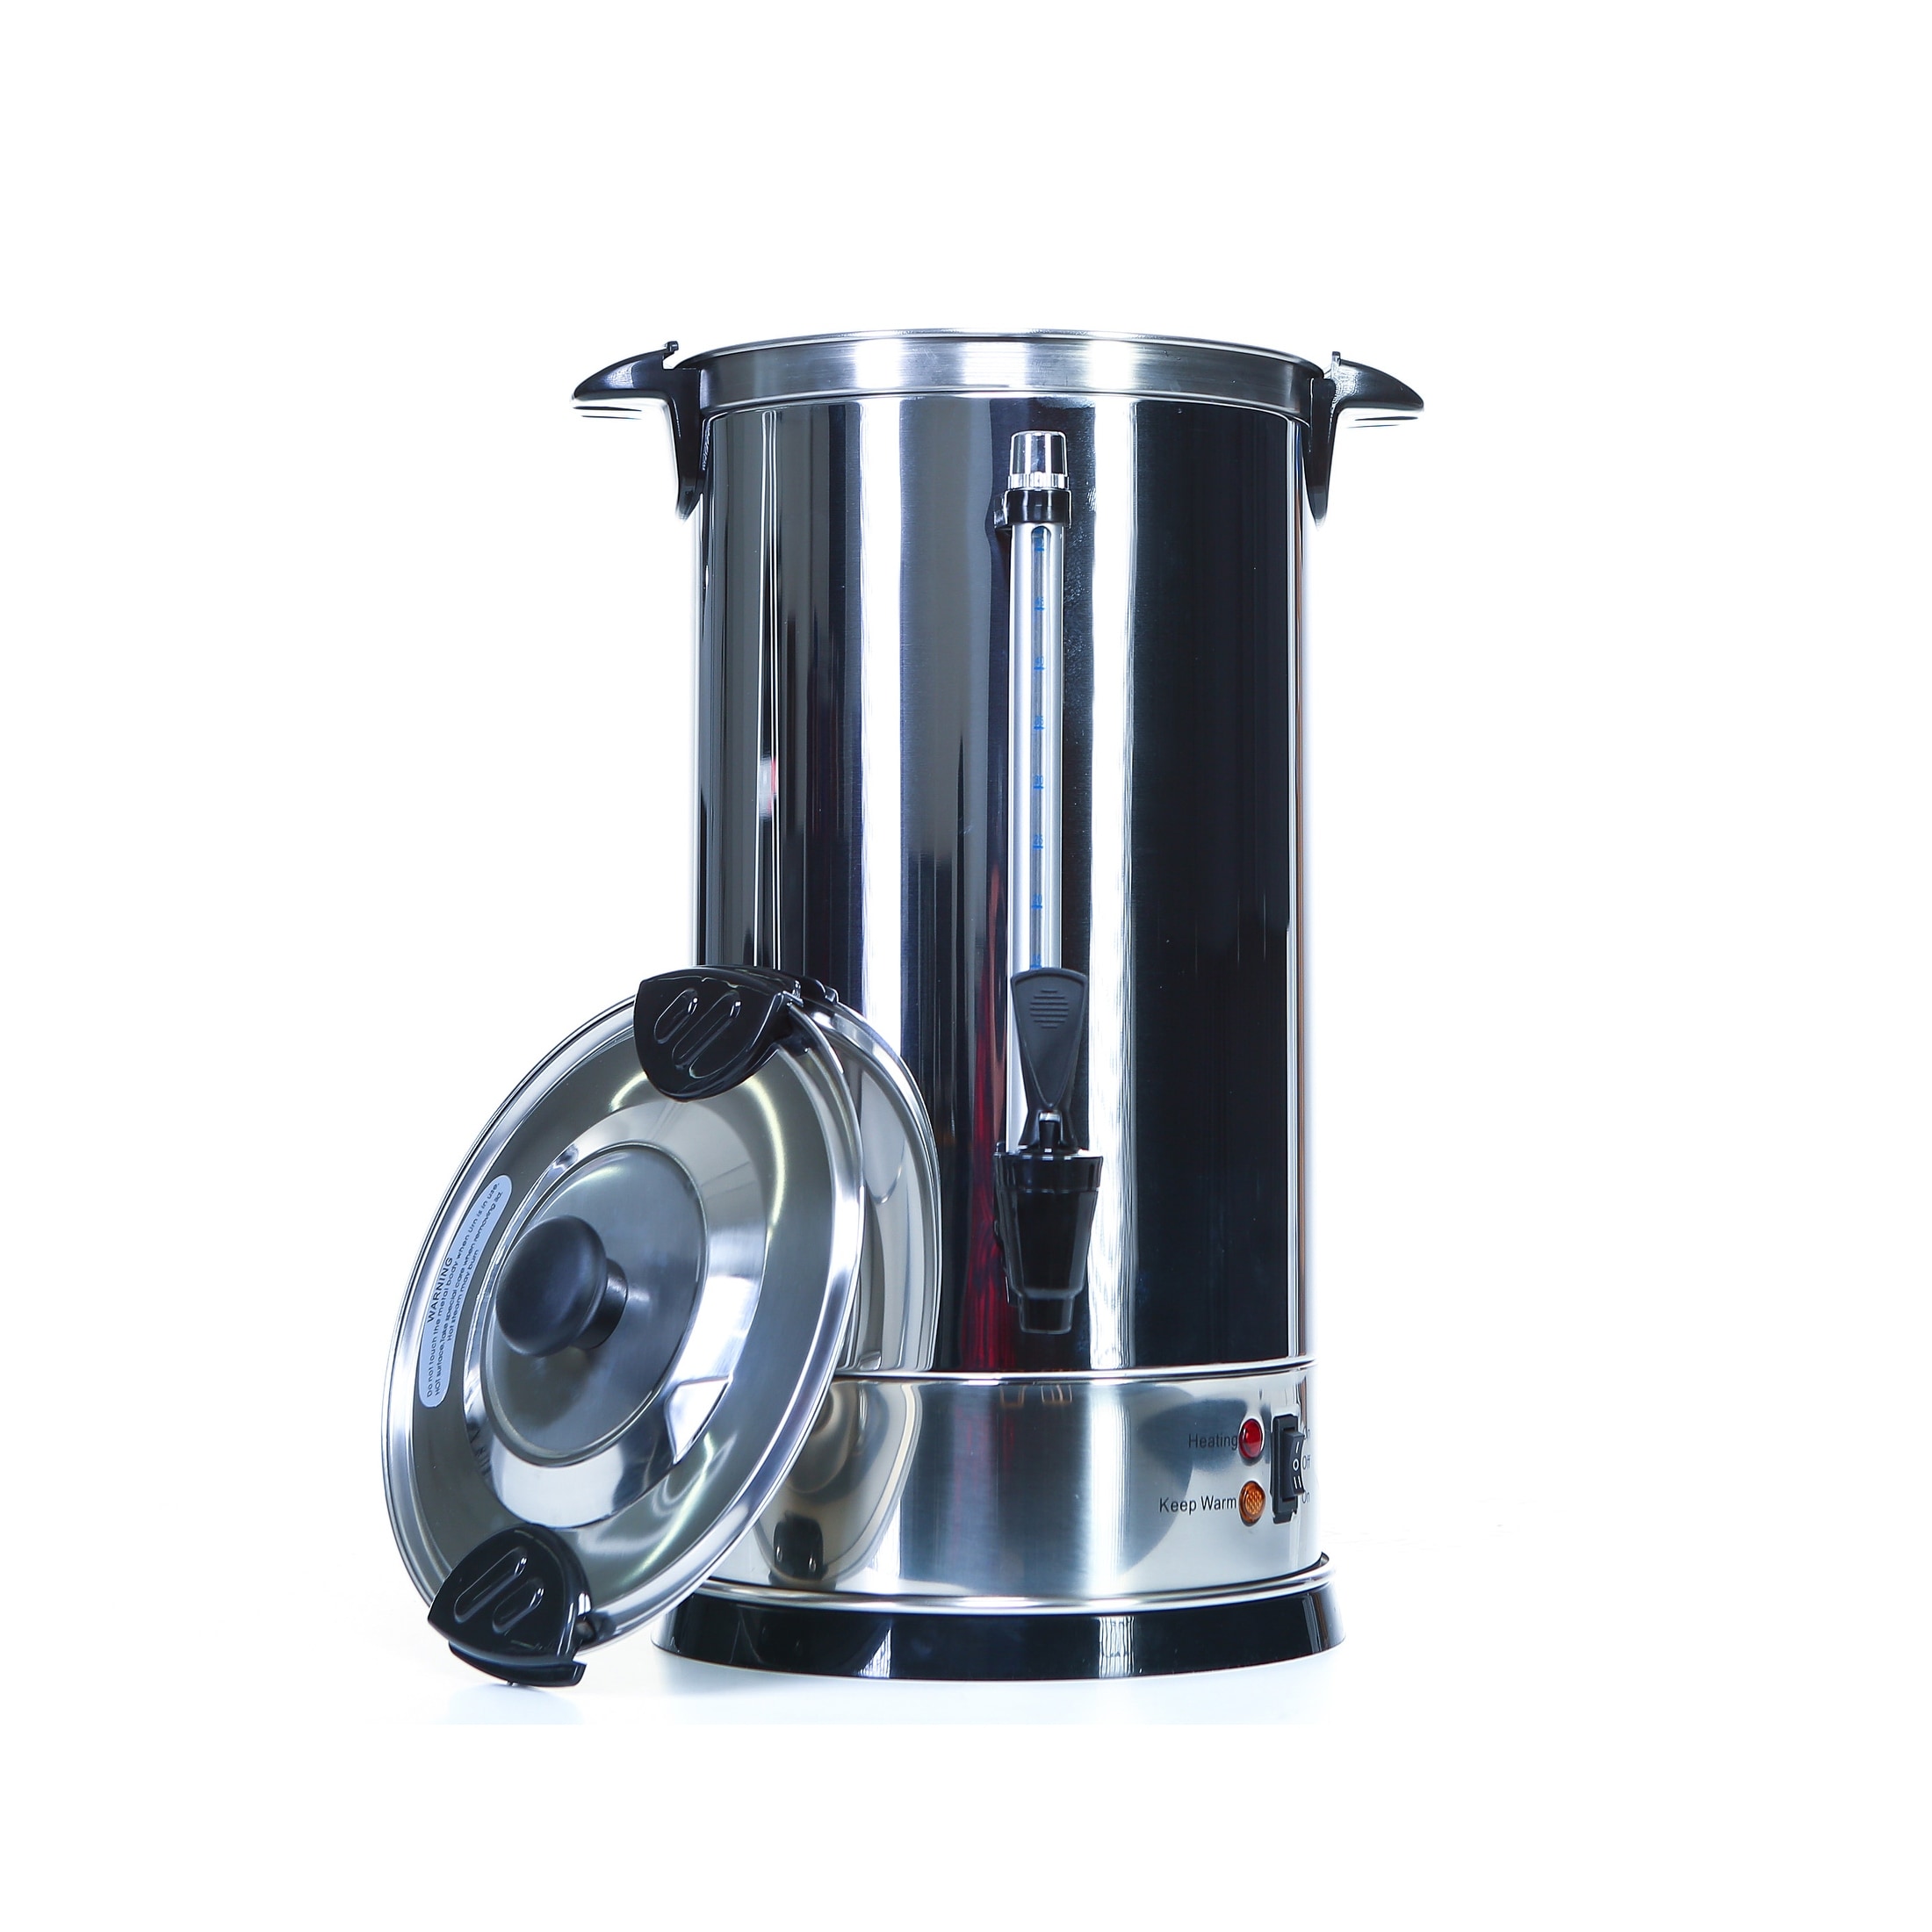 https://ak1.ostkcdn.com/images/products/is/images/direct/6445e8708782e63a96b9b42716cf076ae7dbba74/Shabbat-Automatic-Coffee-Urn-Stainless-Steel-Holiday-Jewish-Dinners.jpg